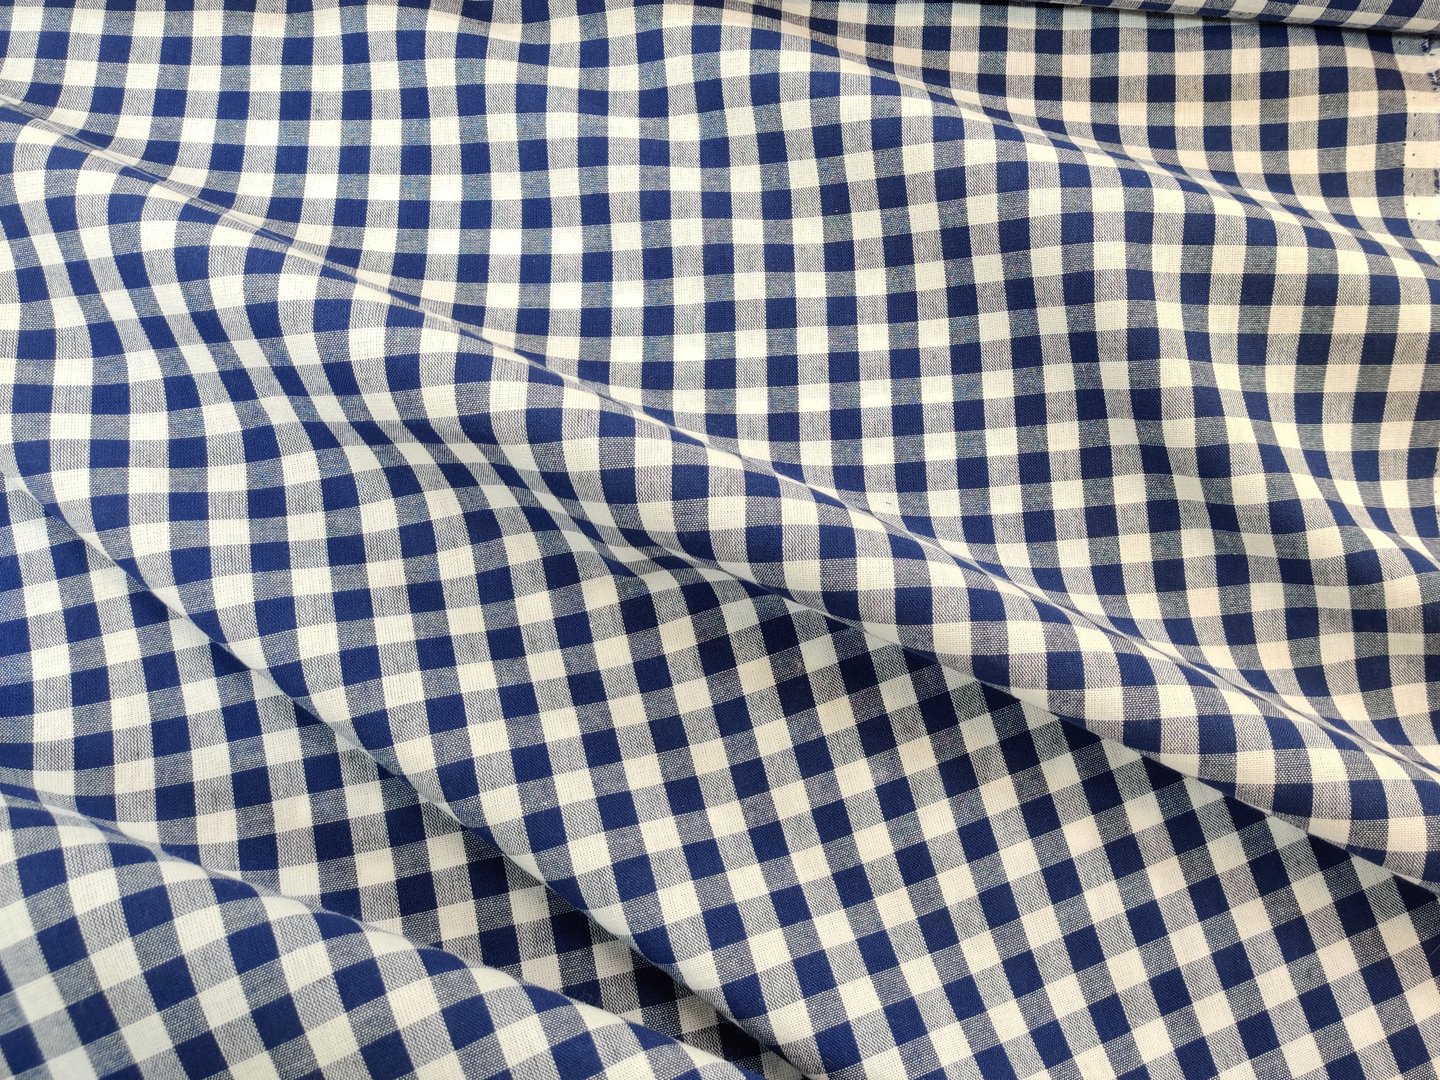 Blue and white checked fabric